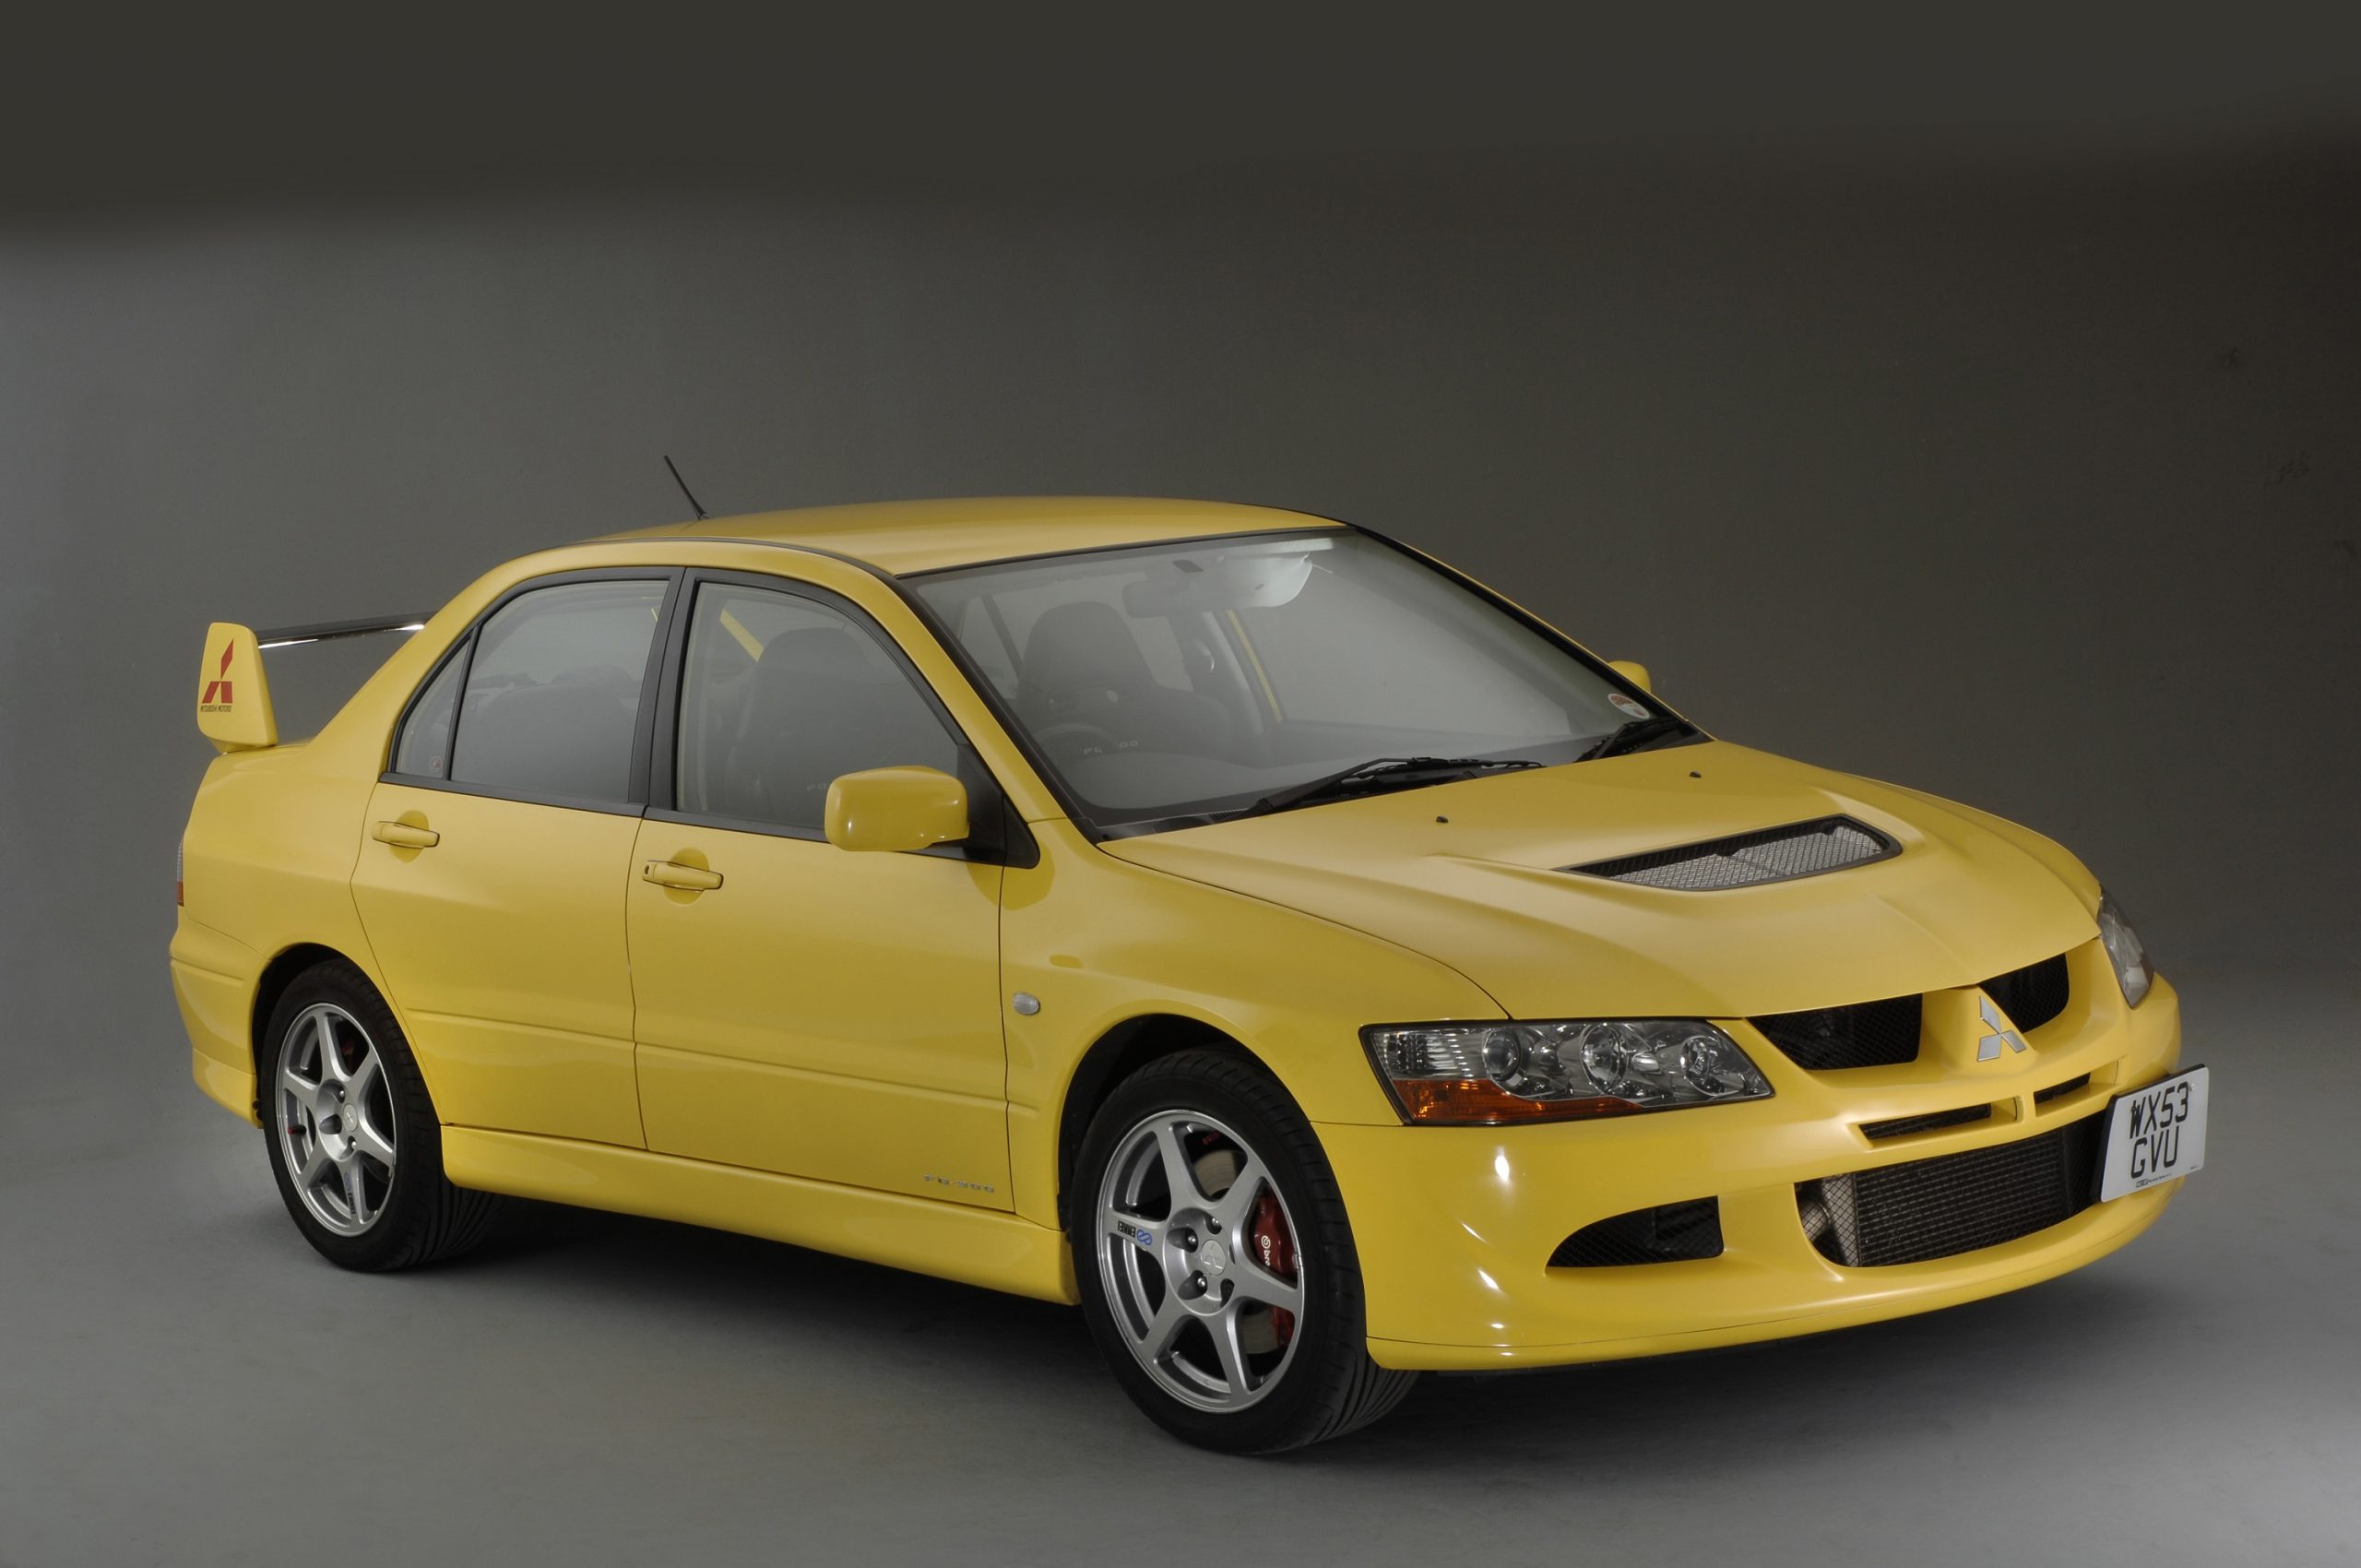 A yellow Mitsubishi Lancer Evolution shot from the front 3/4 in a photo booth